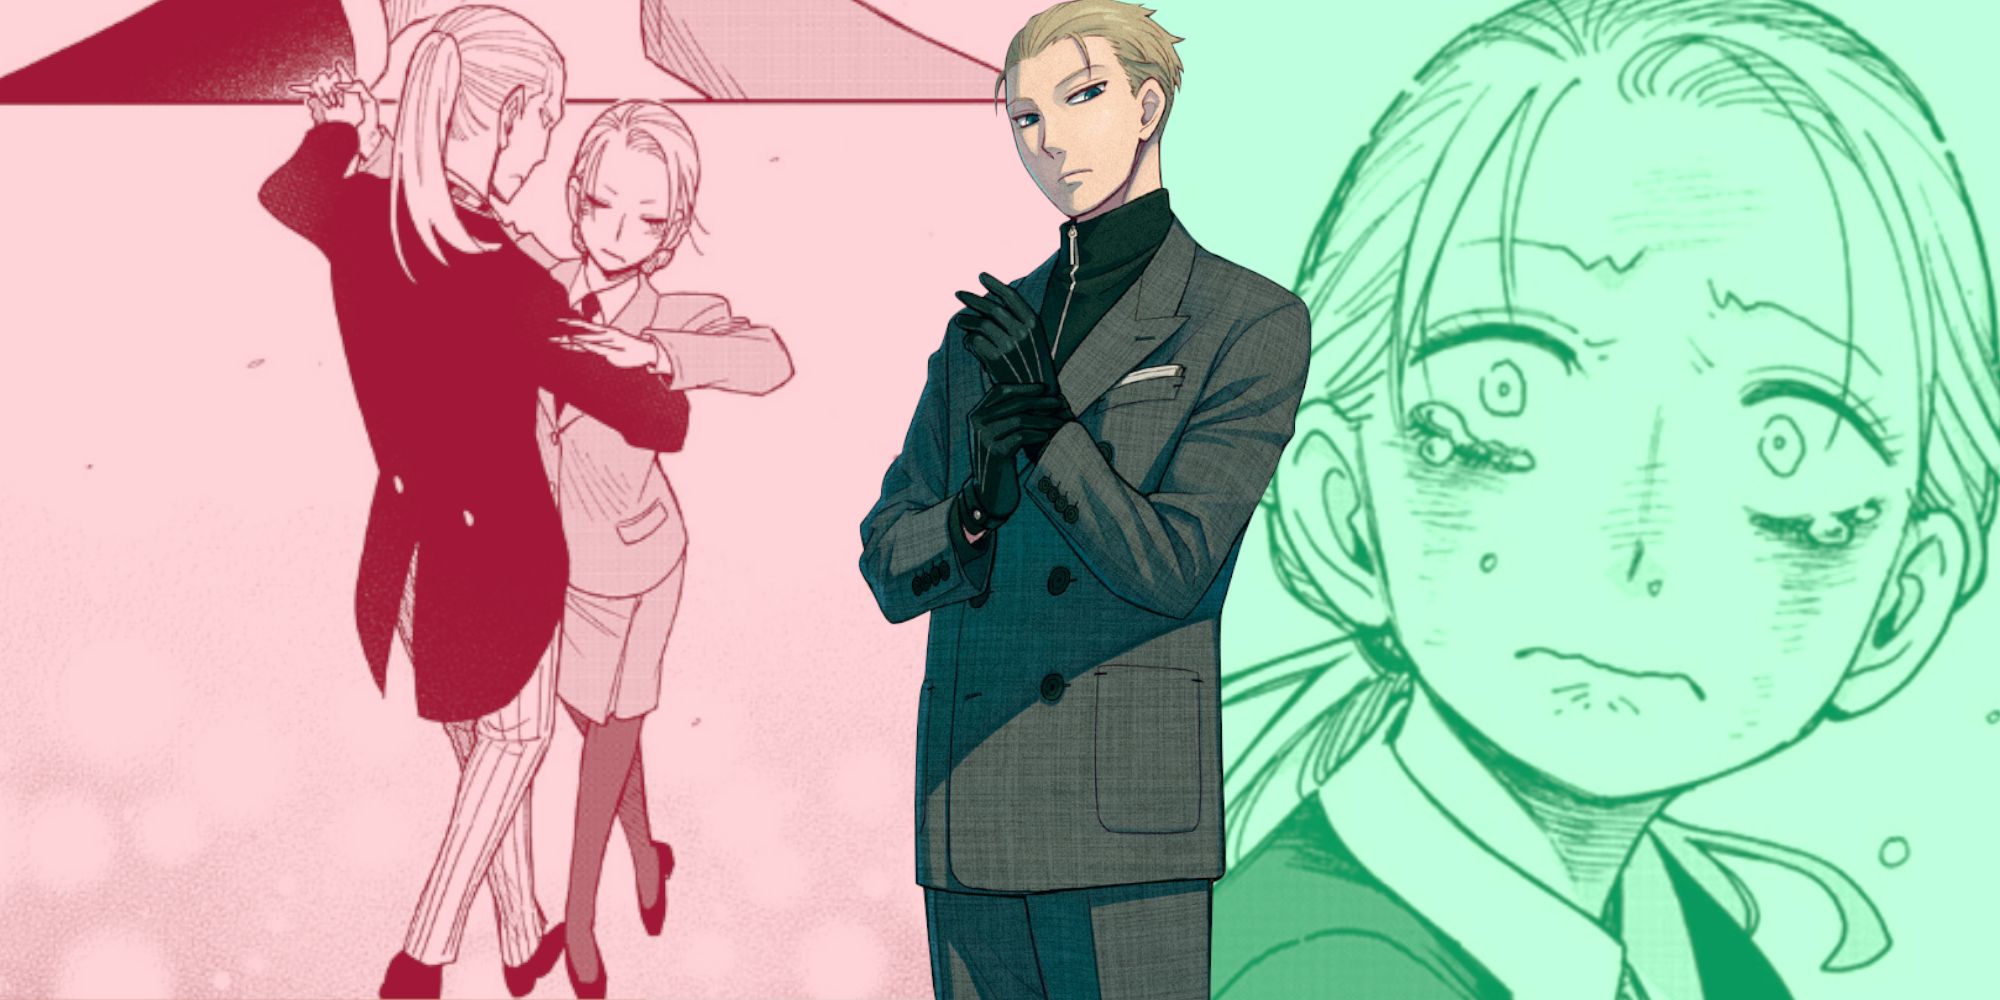 A collage style image depicting Loid from the anime adaptation of Spy x Family standing in front of two manga panels from Spy x Family.